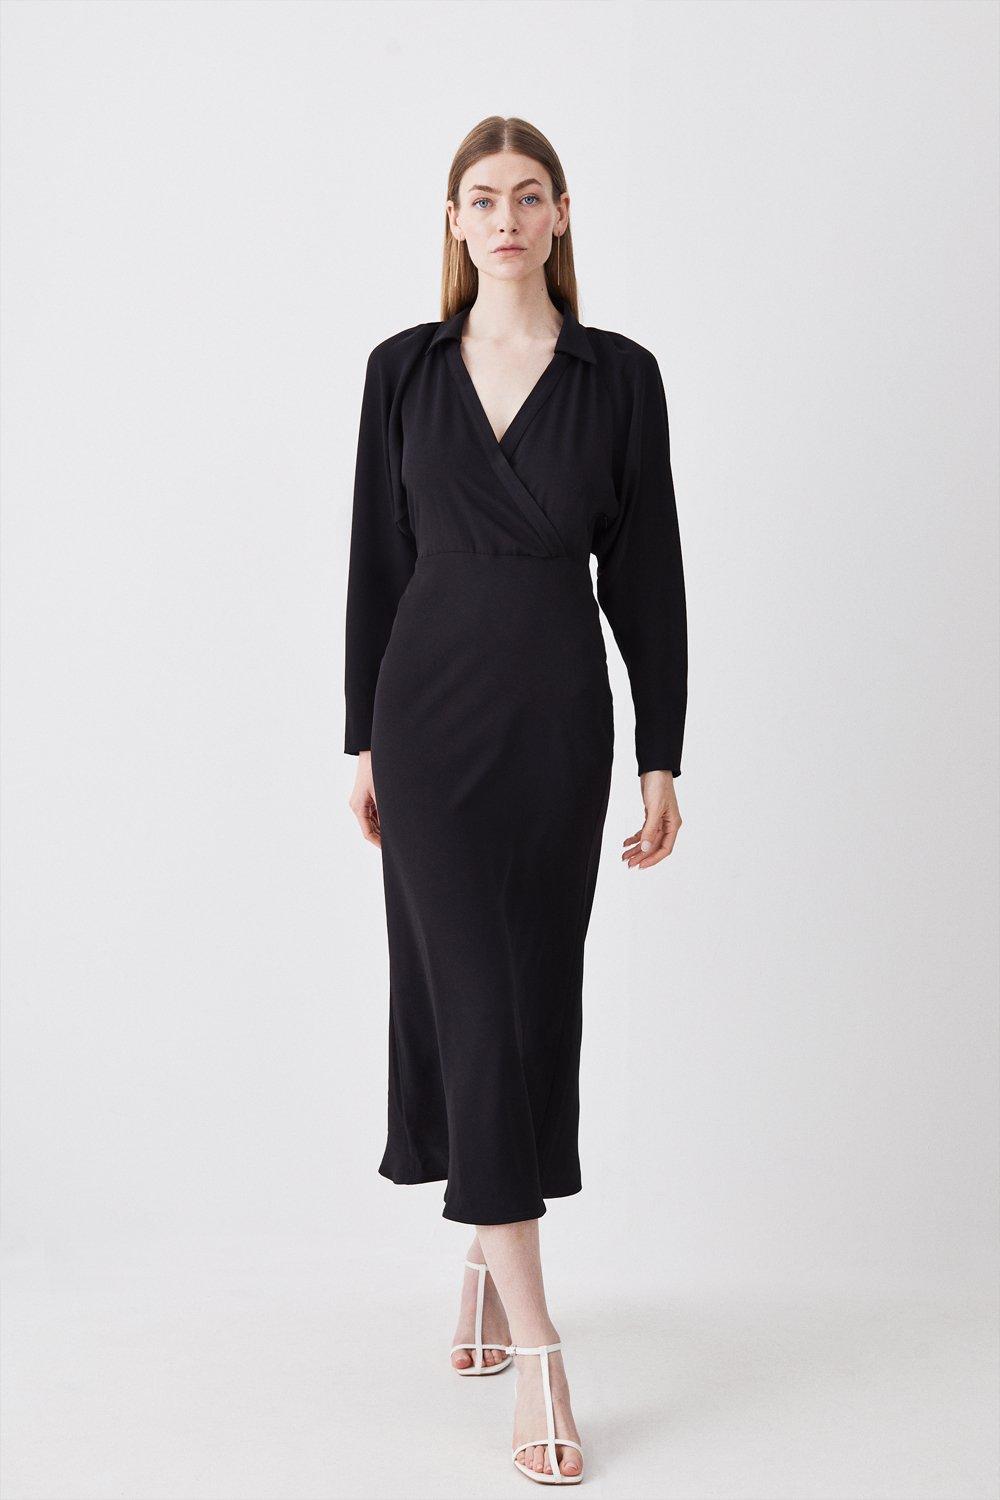 Collared Batwing Midaxi Woven Dress